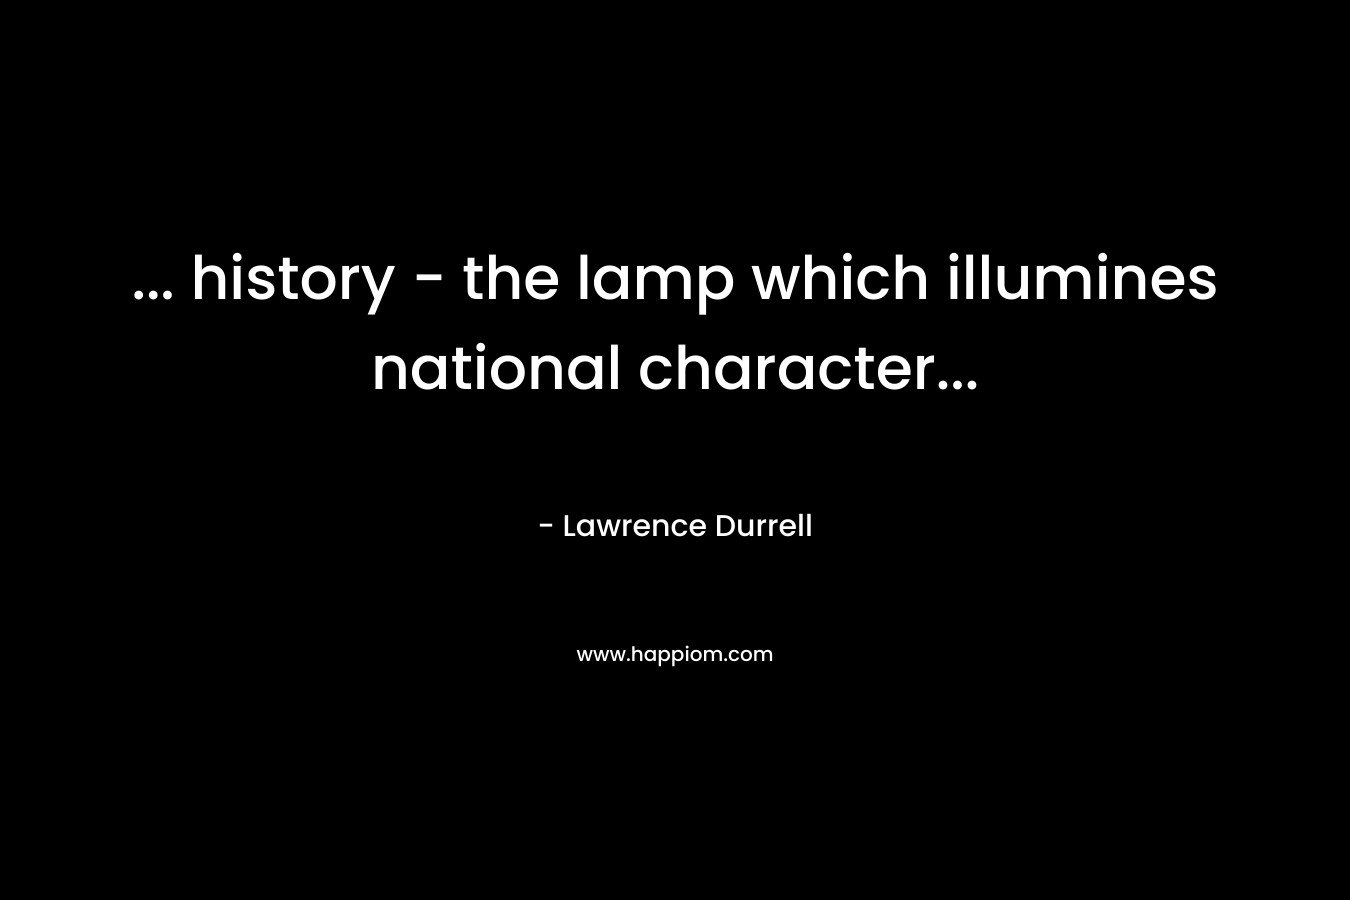 ... history - the lamp which illumines national character...